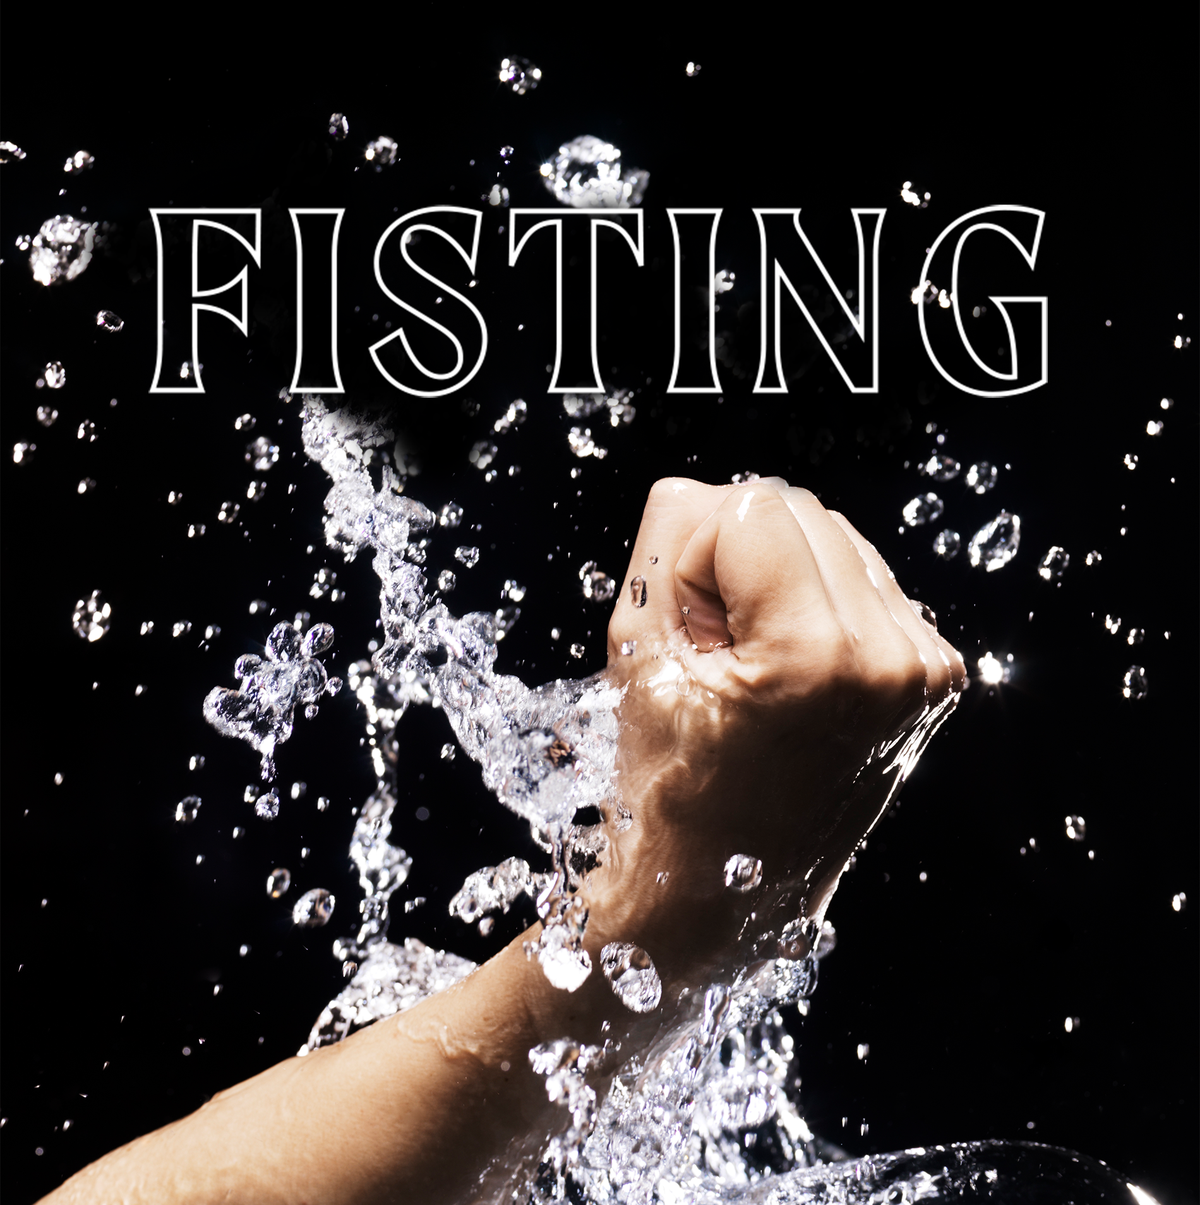 Easy Self Fisting Pussy - 24 Fisting Tips for Beginners - How Do You Fist A Woman?